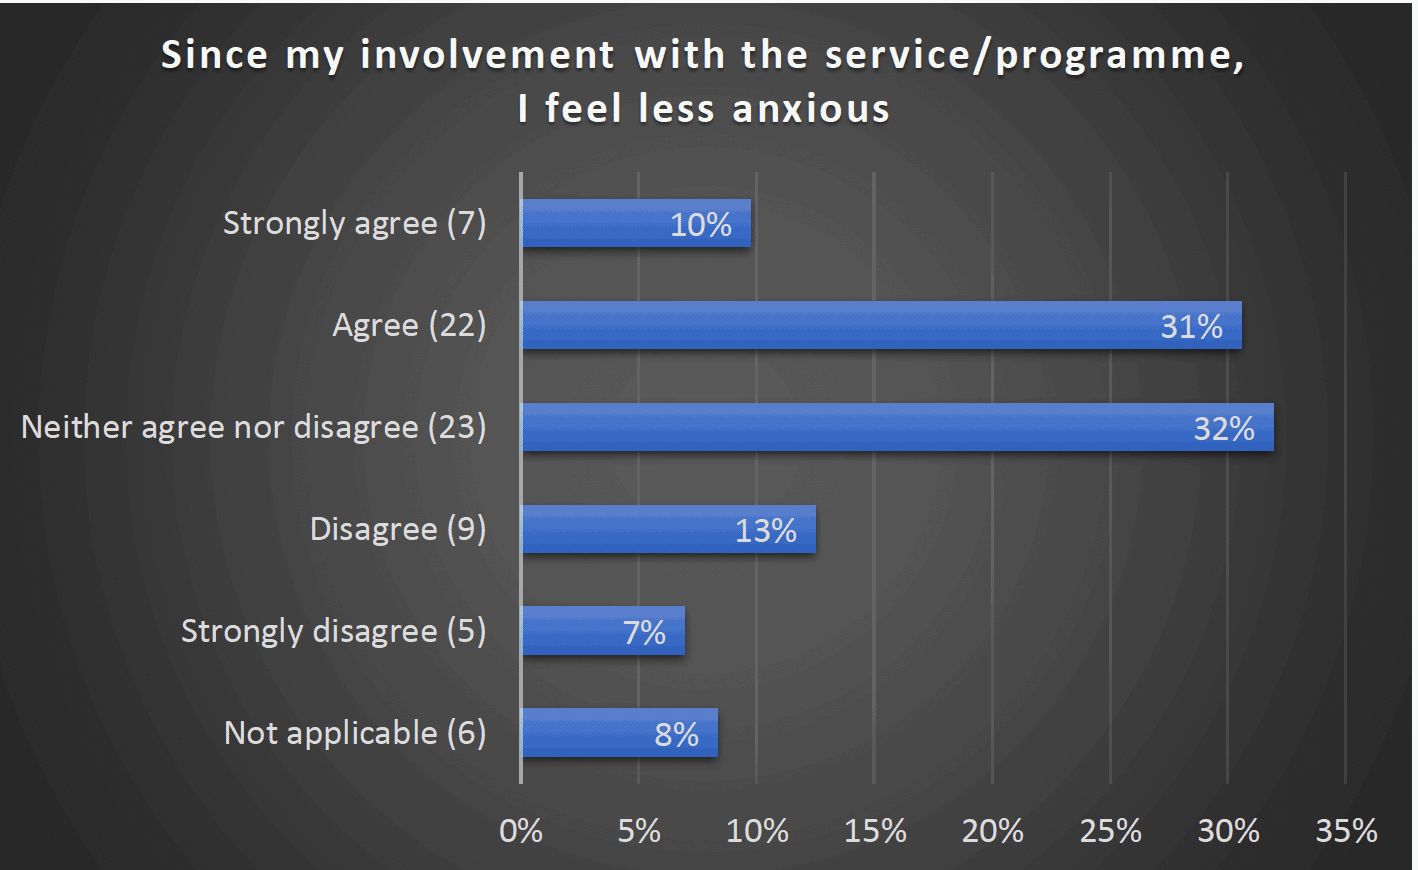 Since my involvement with the service/programme, I feel less anxious - Strongly agree (7) 10%, Agree (22) 31%, Neither agree nor disagree (23) 32%, Disagree (9) 13%, Strongly disagree (5) 7%, Not applicable (6) 8%